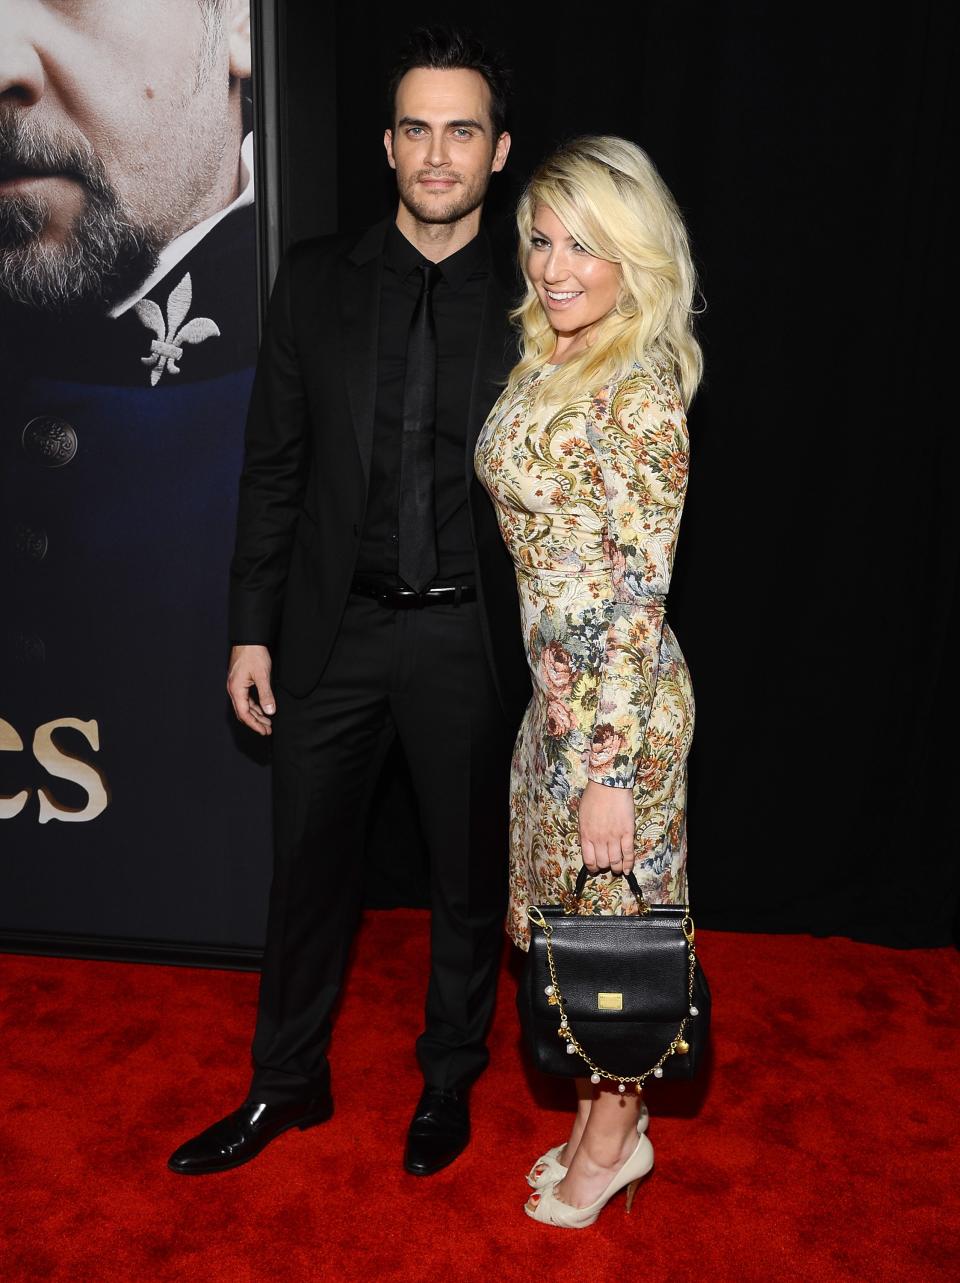 NEW YORK, NY - DECEMBER 10: Cheyenne Jackson and Ari Graynor attend the "Les Miserables" New York premiere at Ziegfeld Theatre on December 10, 2012 in New York City. (Photo by Larry Busacca/Getty Images)